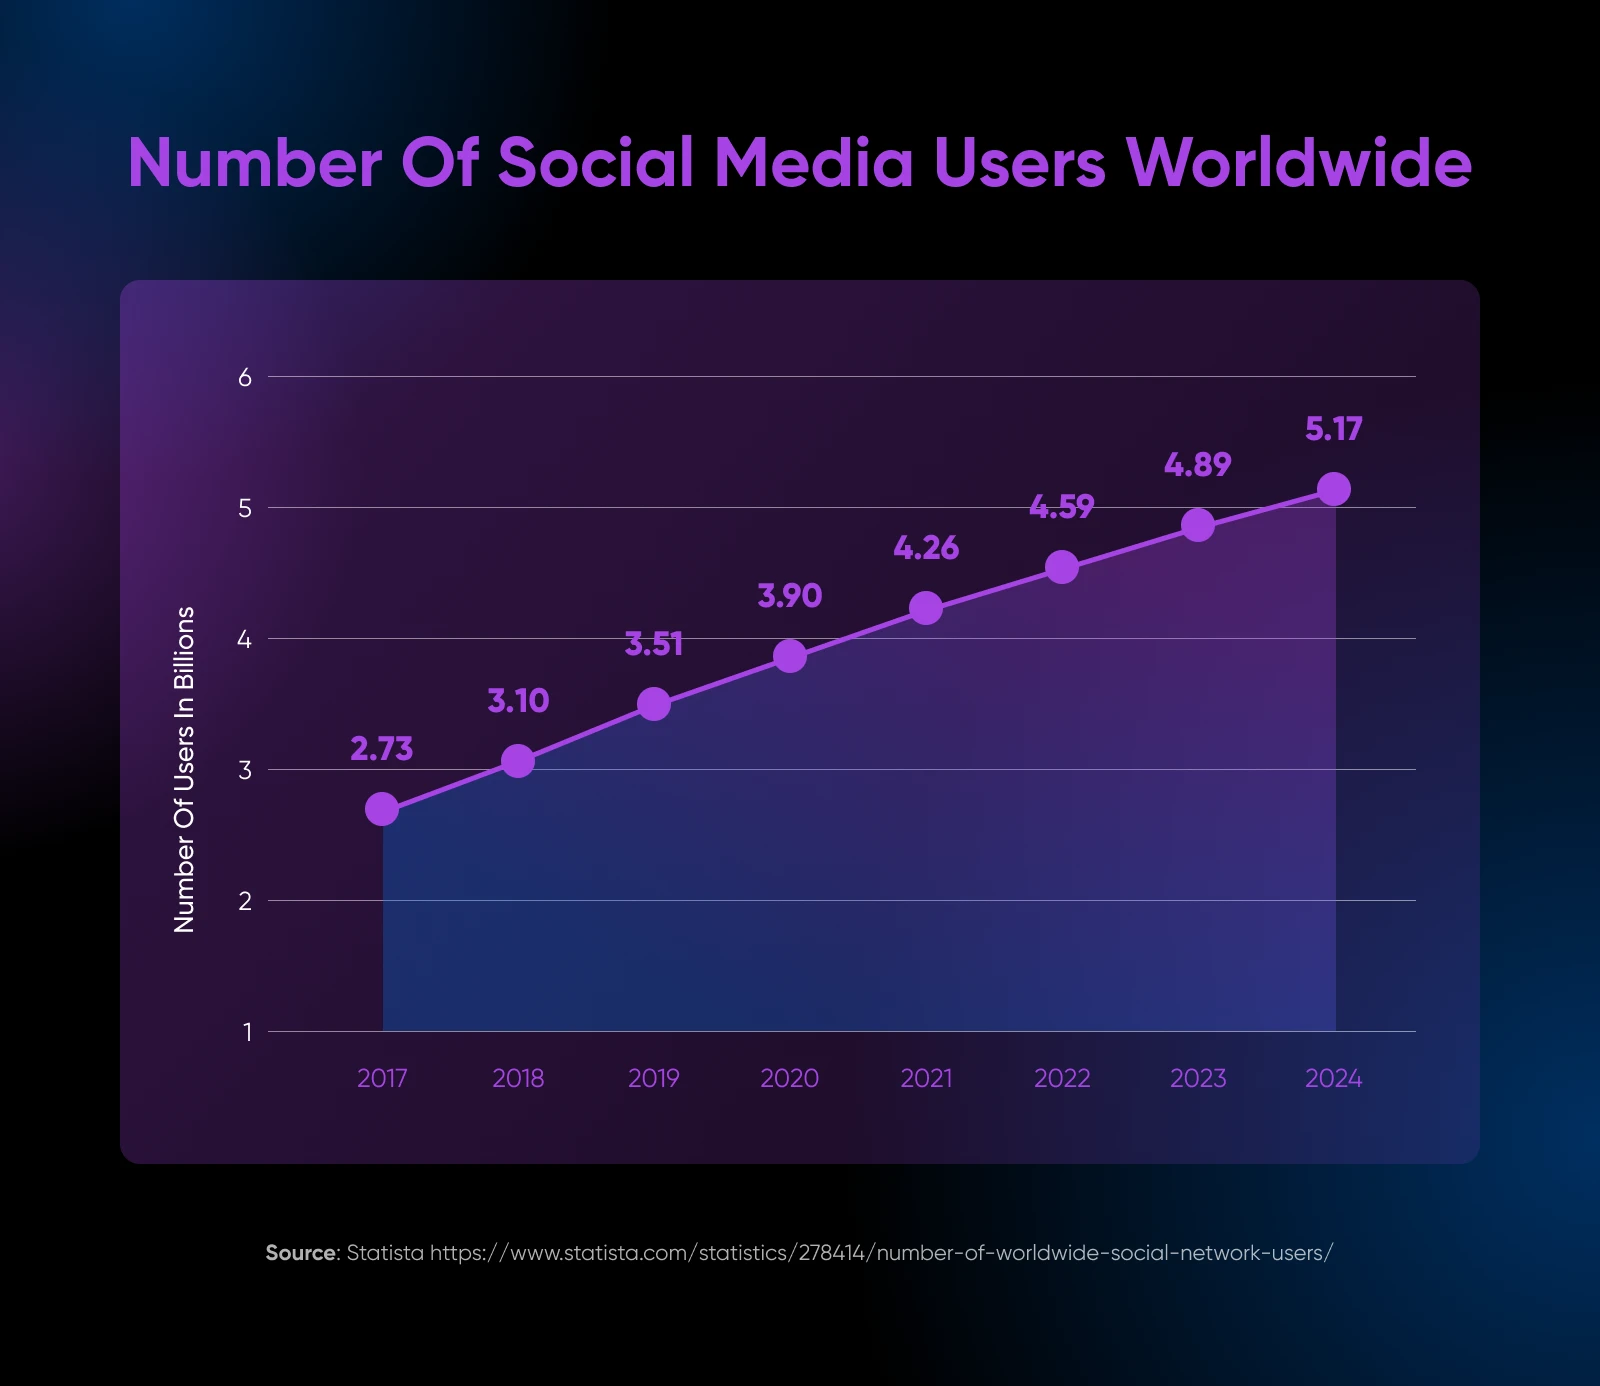 The number of social media users worldwide in billions appears on the y-axis and the year on the x-axis